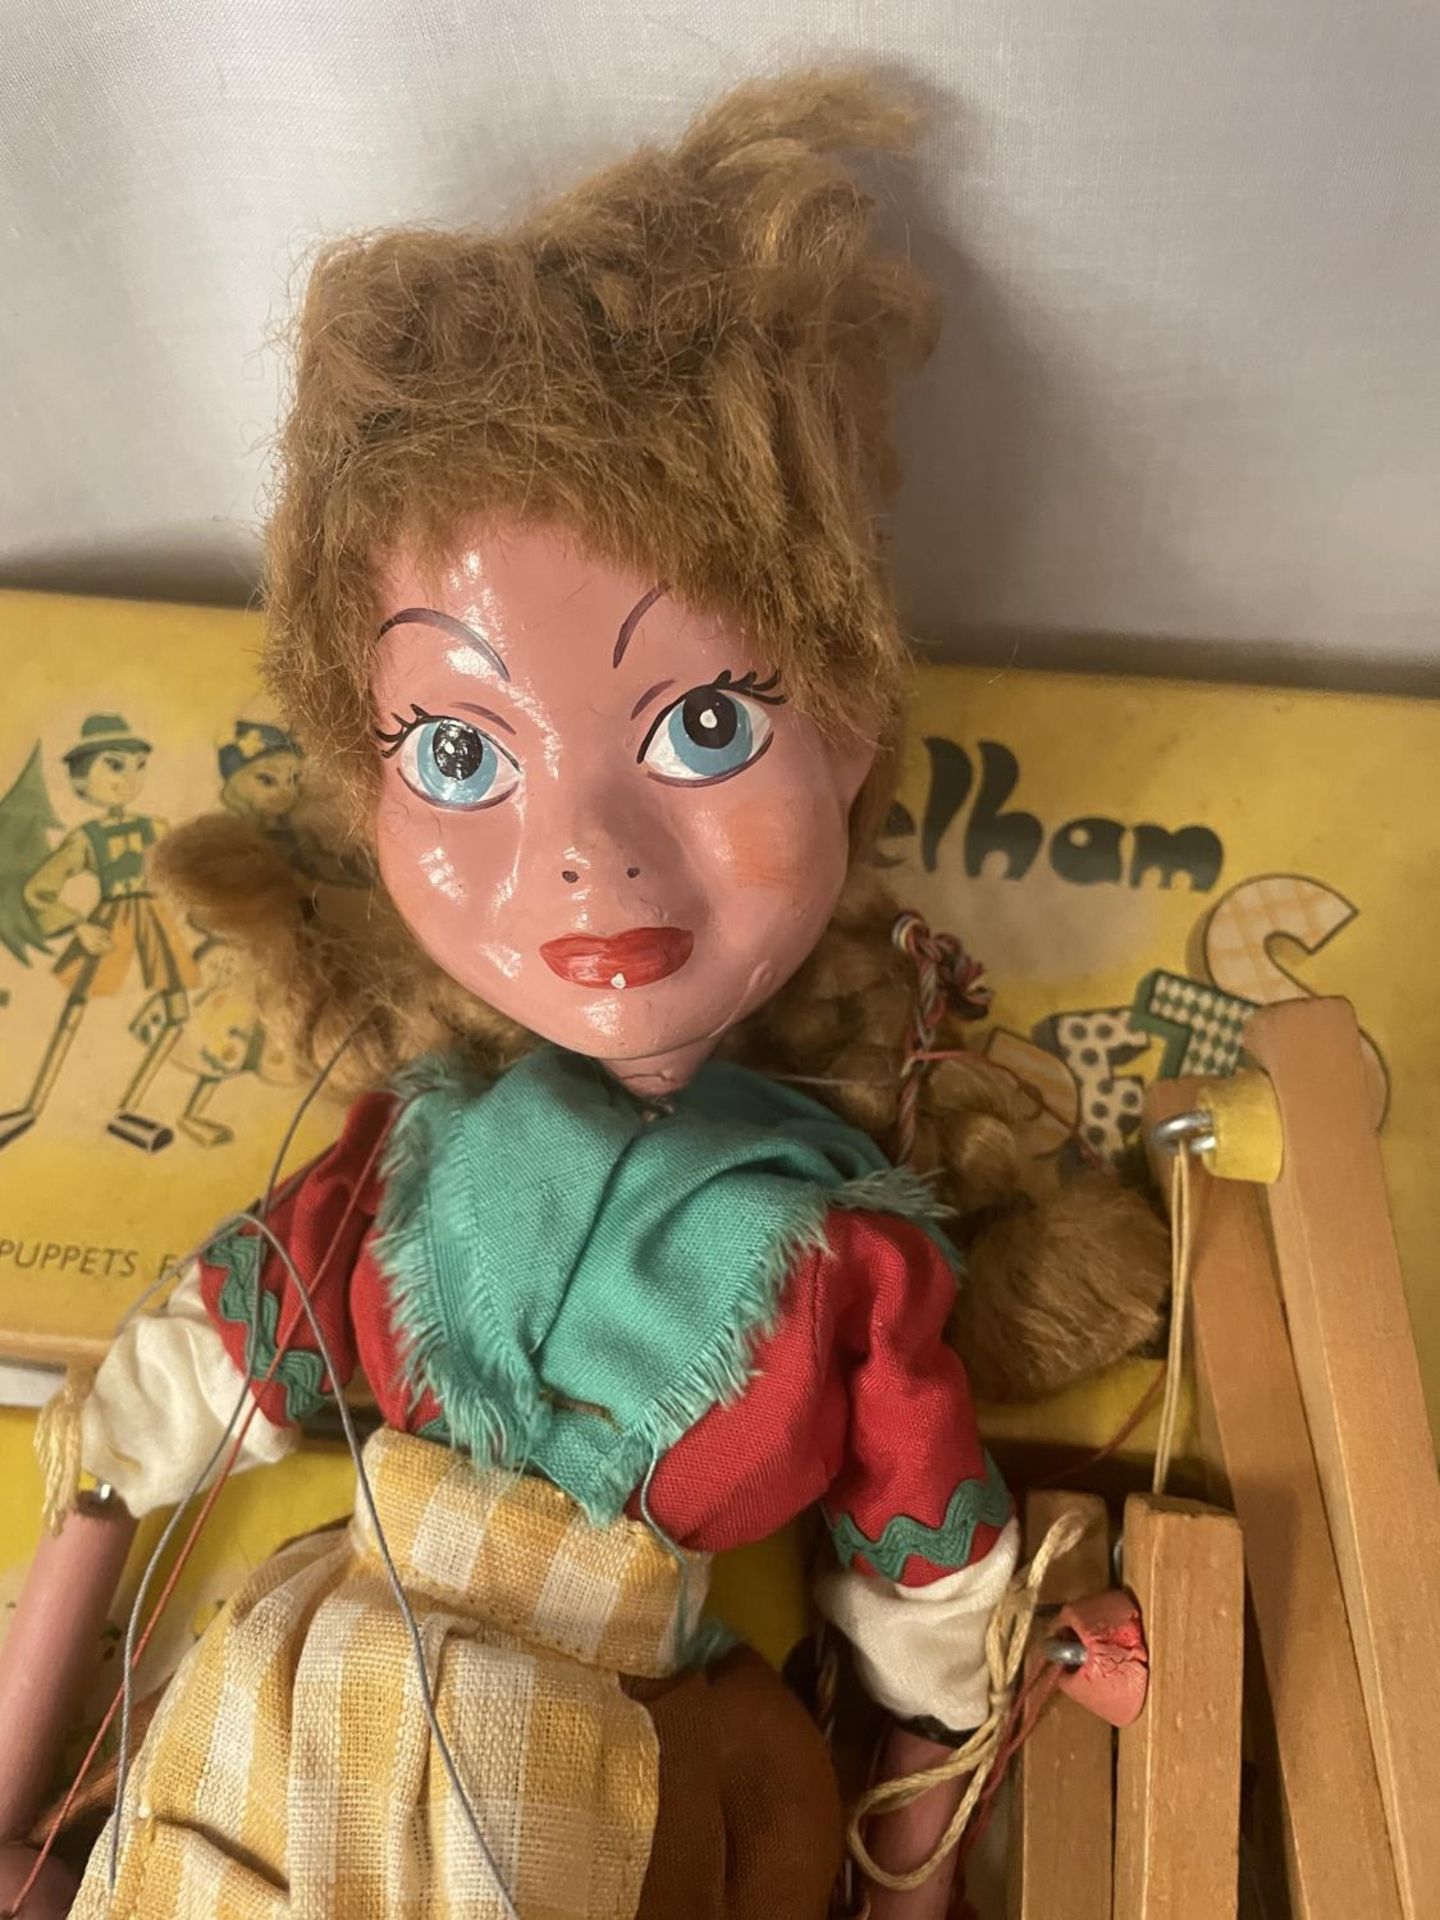 TWO BOXED VINTAGE PELHAM PUPPETS - HANSEL AND GRETEL - Image 4 of 8